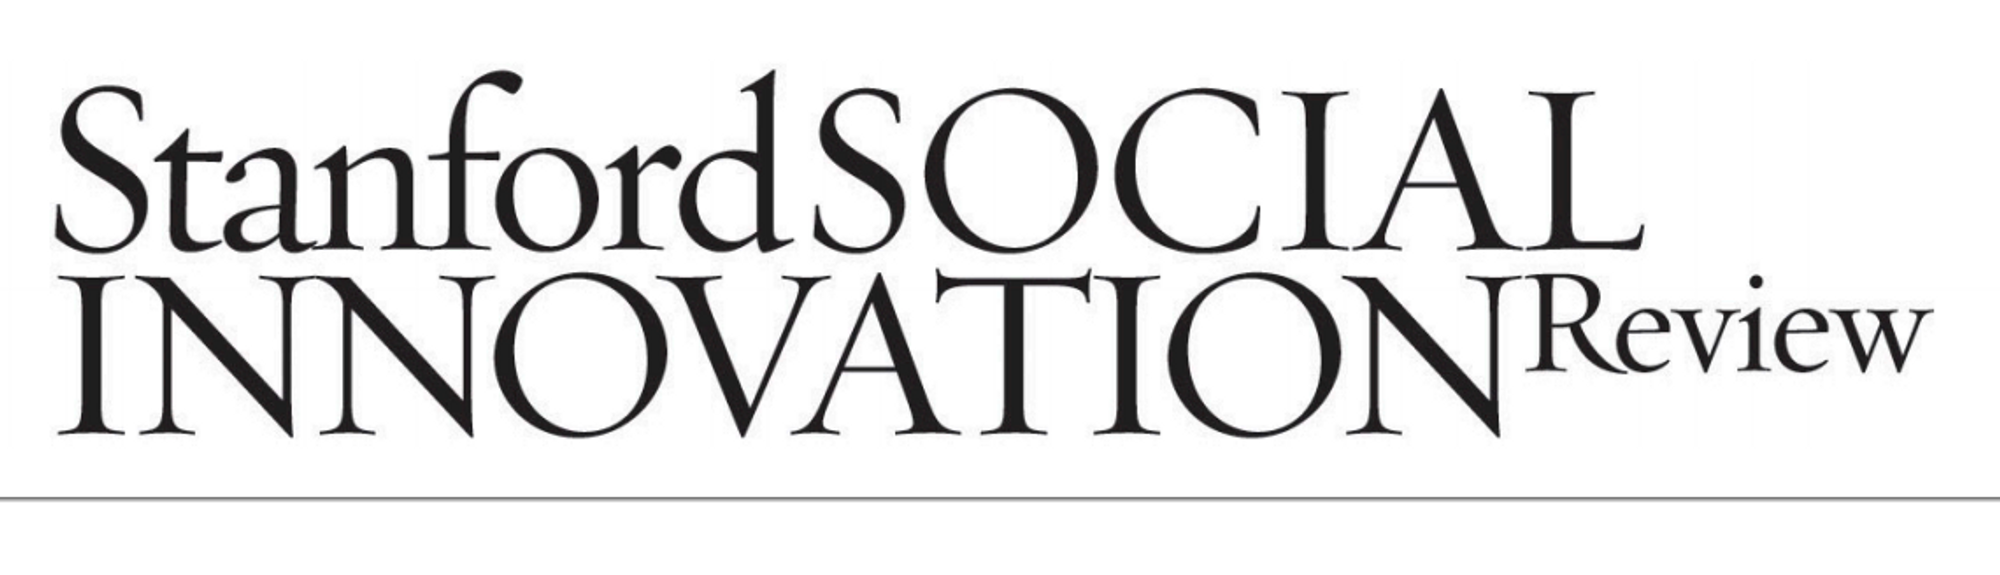 Stanford Social Inovation Review